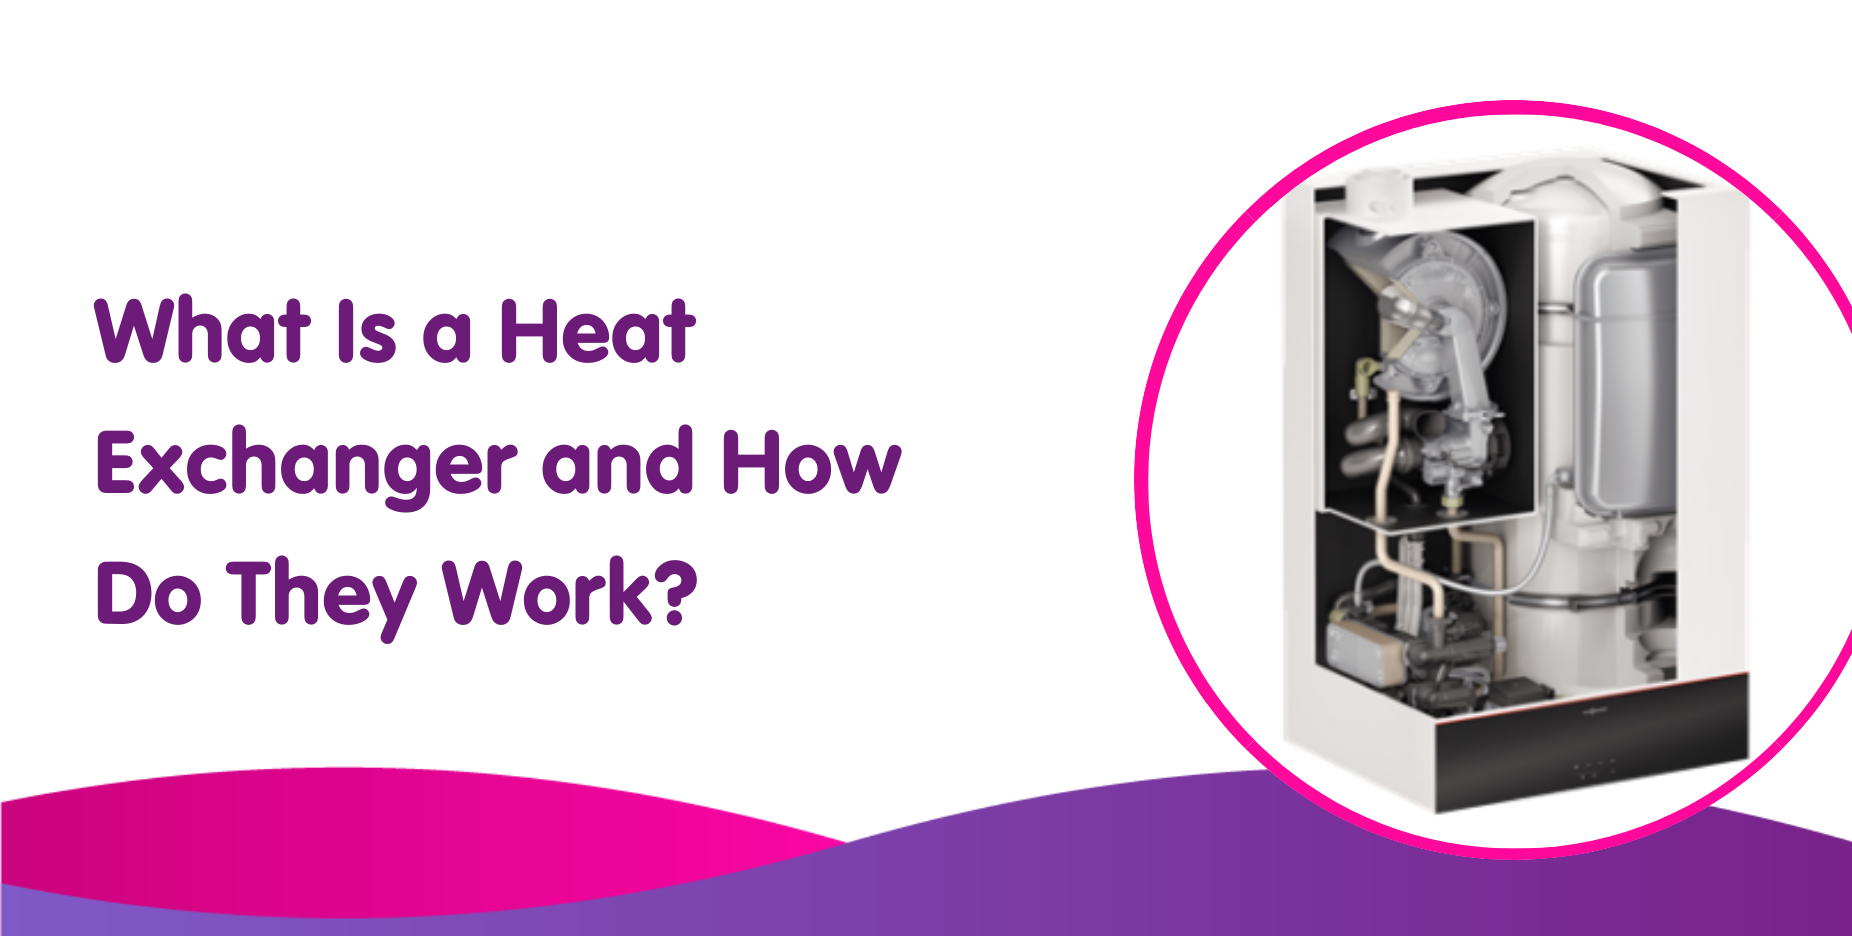 What Is a Heat Exchanger and How Do They Work?